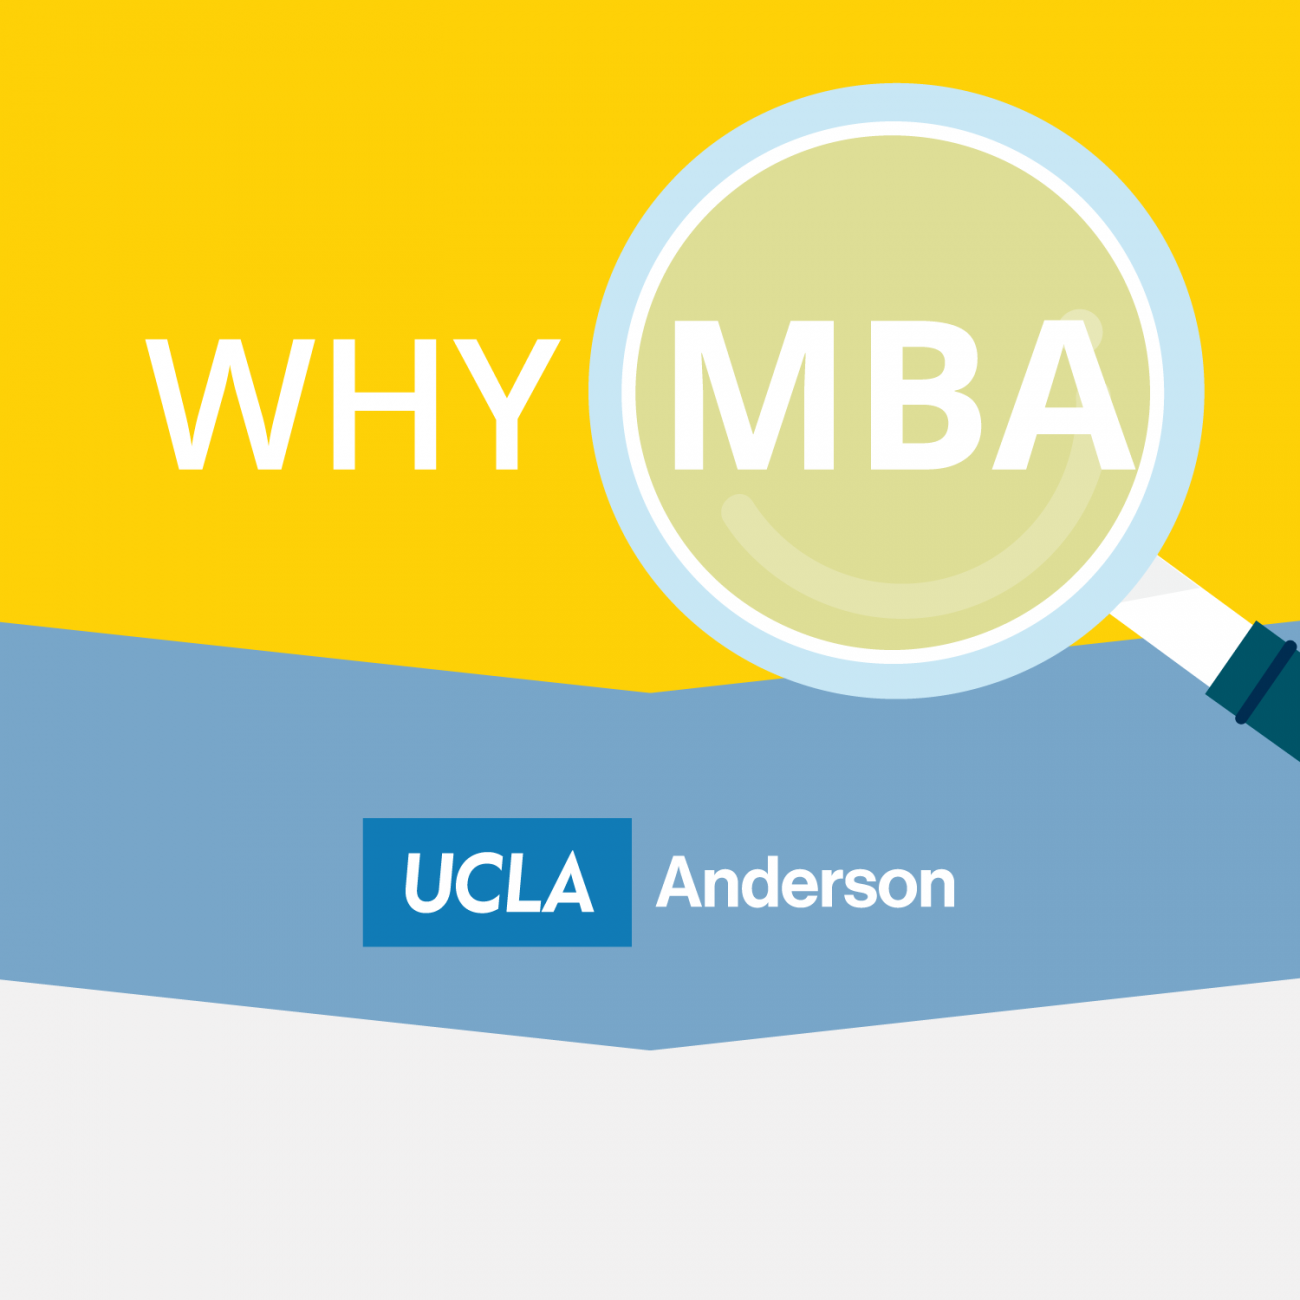 Why MBA - UCLA Anderson